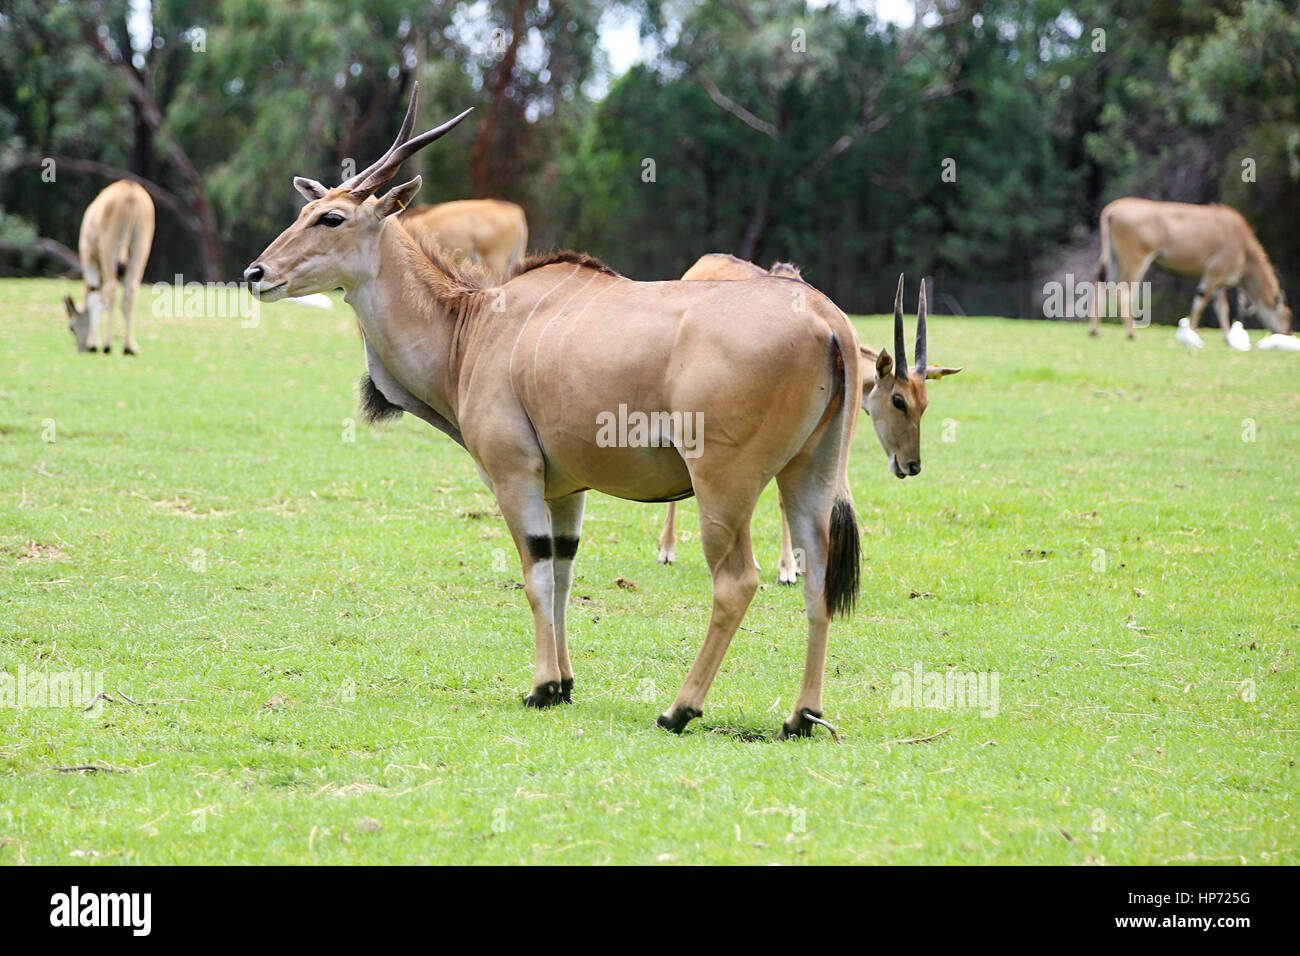 Eland from from Taronga Western Plains Zoo in Dubbo. This city zoo was opened at 1977 and now have more than 97 species. Stock Photo